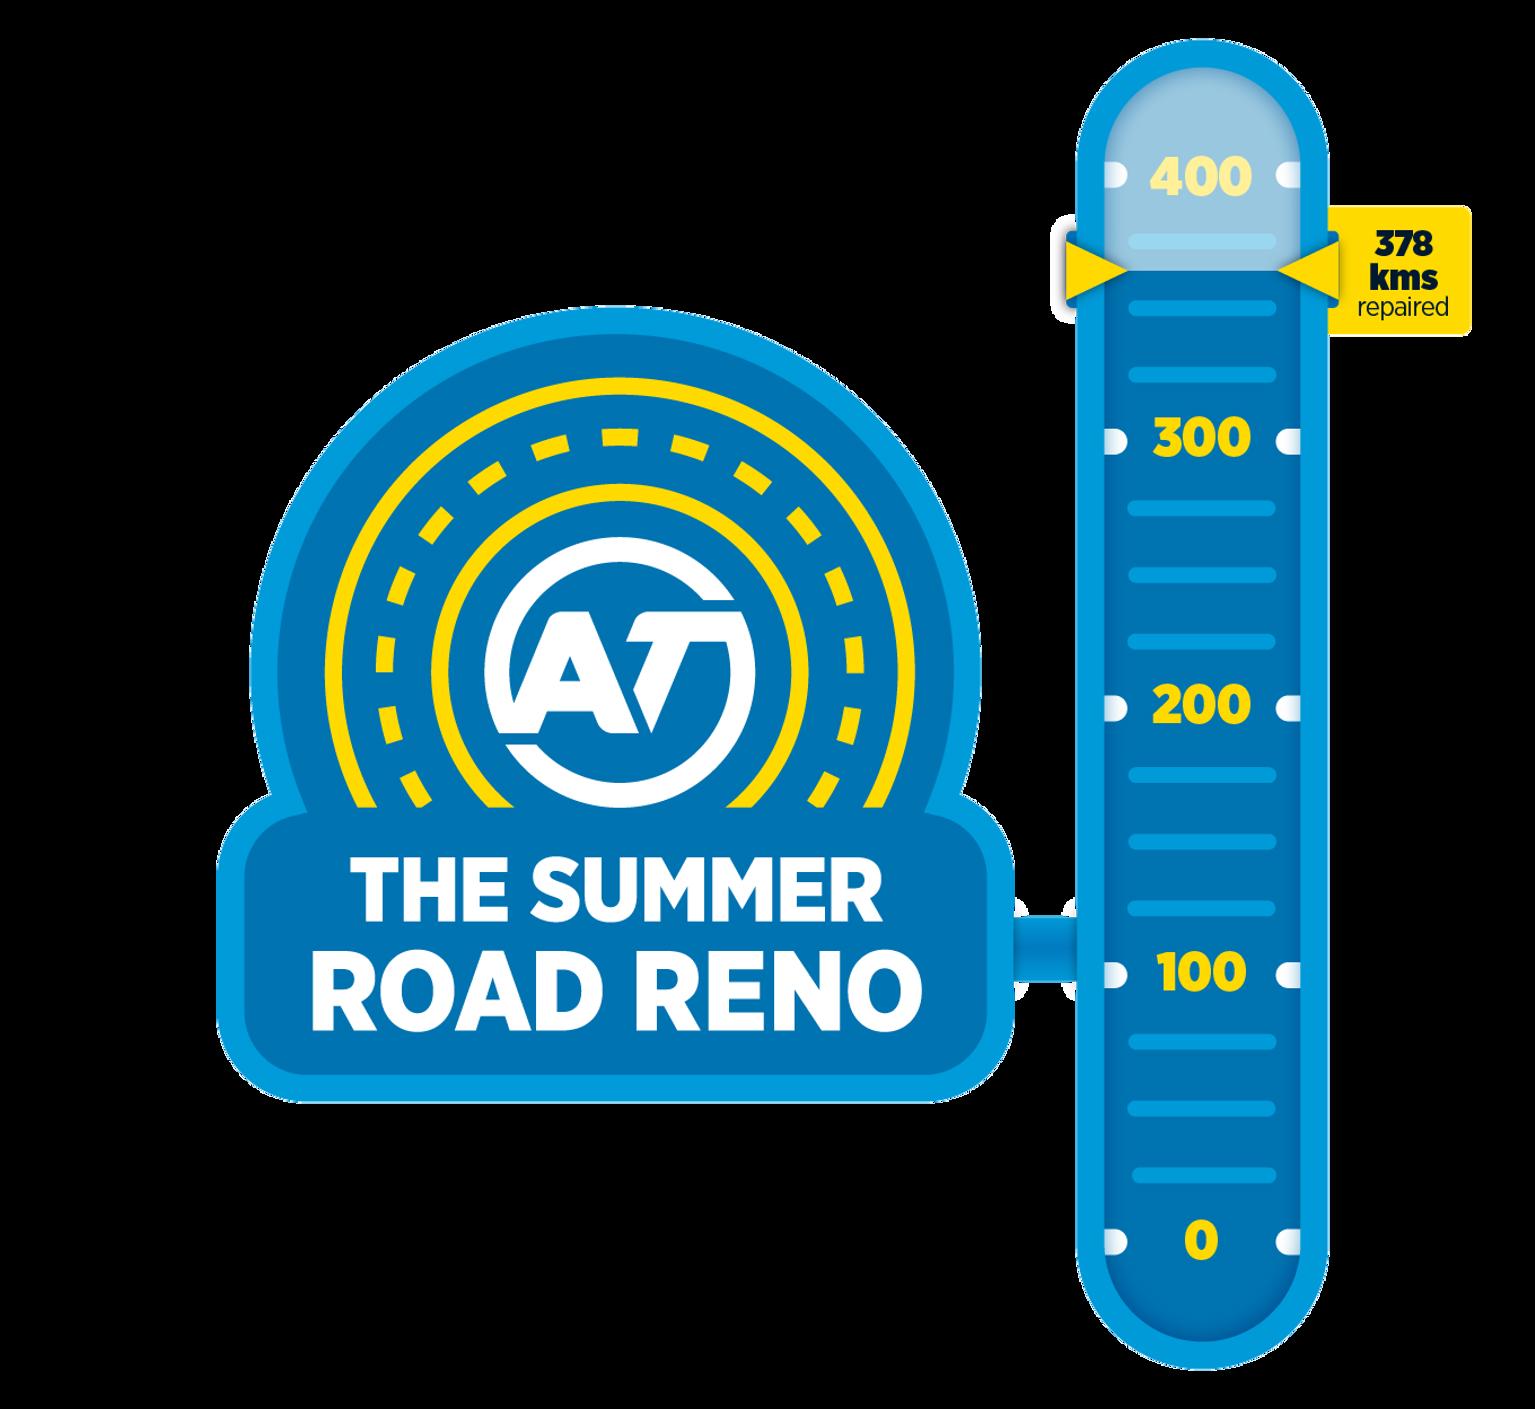 Summer road reno 'renometer' showing progress made so far. 378km of roads have been repaired. 